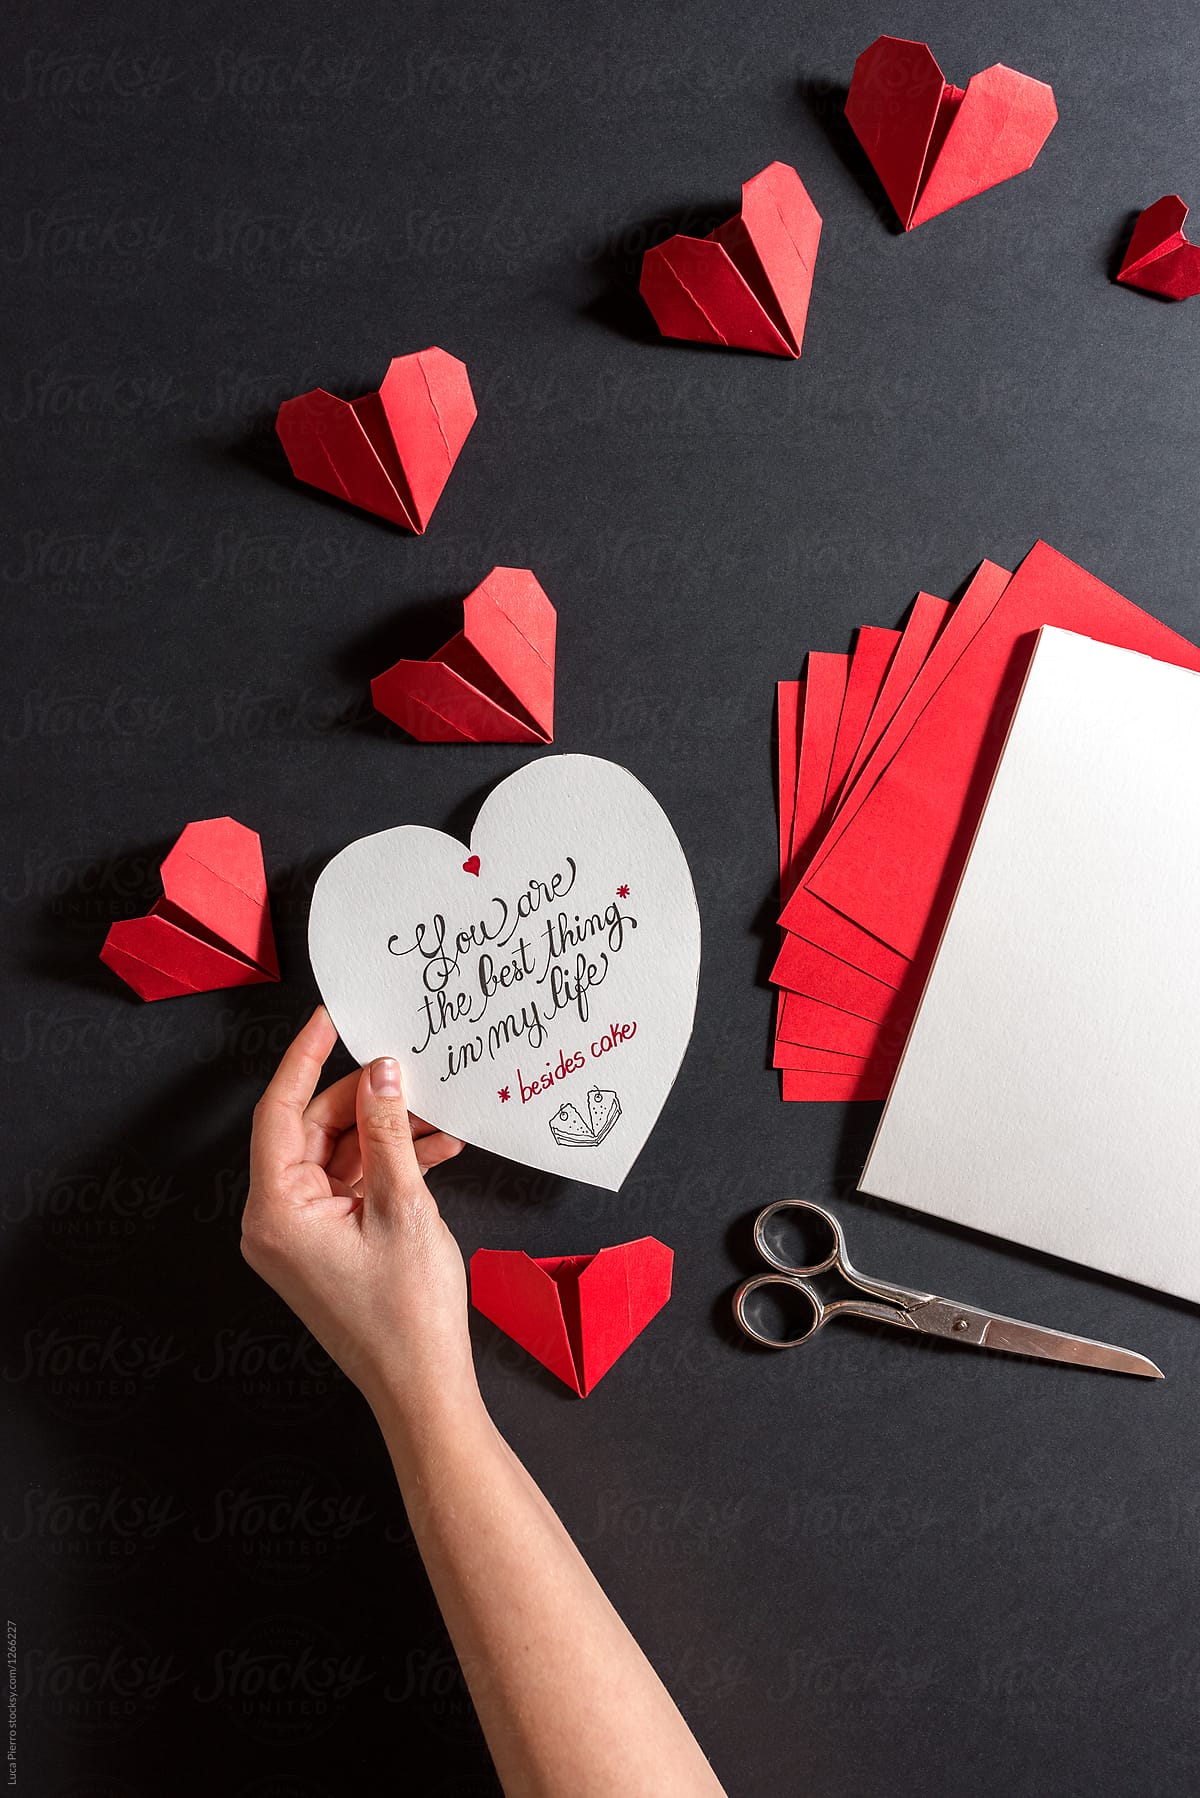 Handmade hearts and messages for Valentine's Day